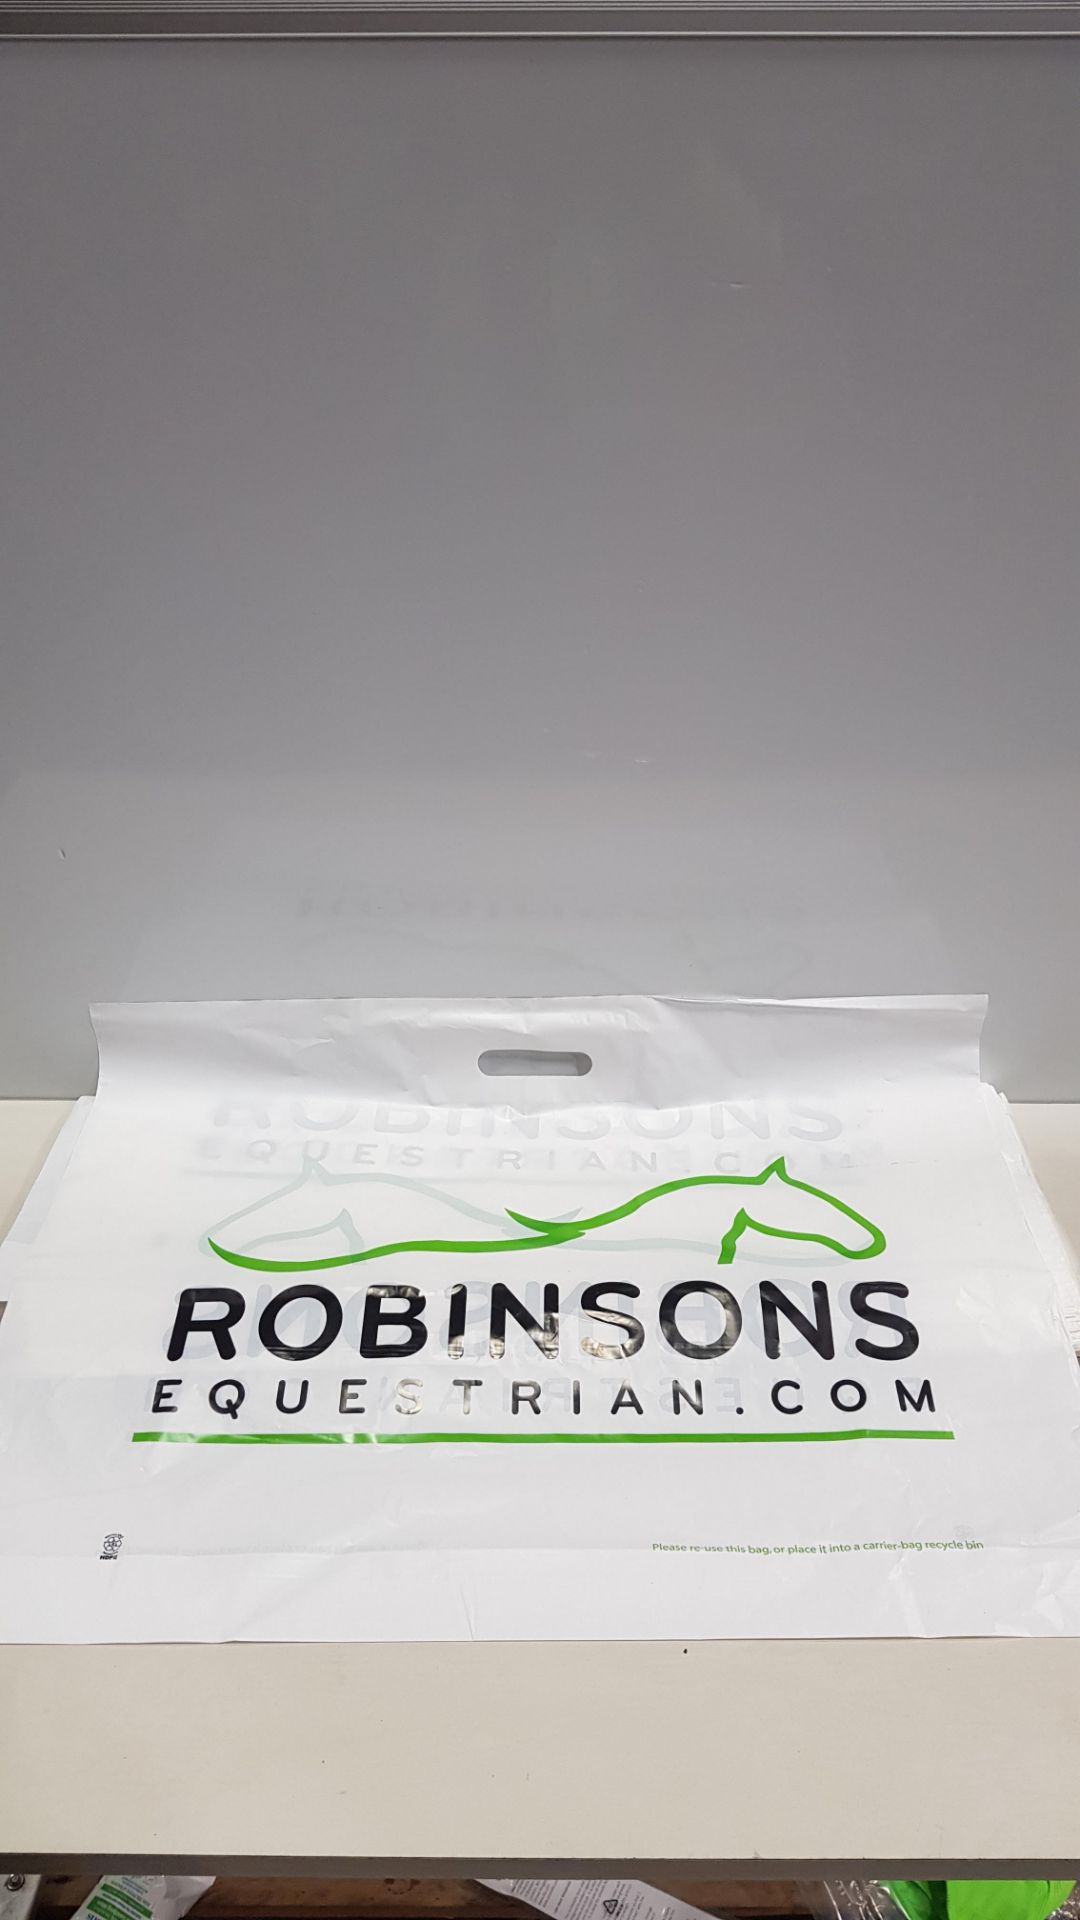 3,000 BRAND NEW PLASTIC BAGS ROBINSONS EQUESTRIAN.COM 70 X 50CM.IN 12 BOXES